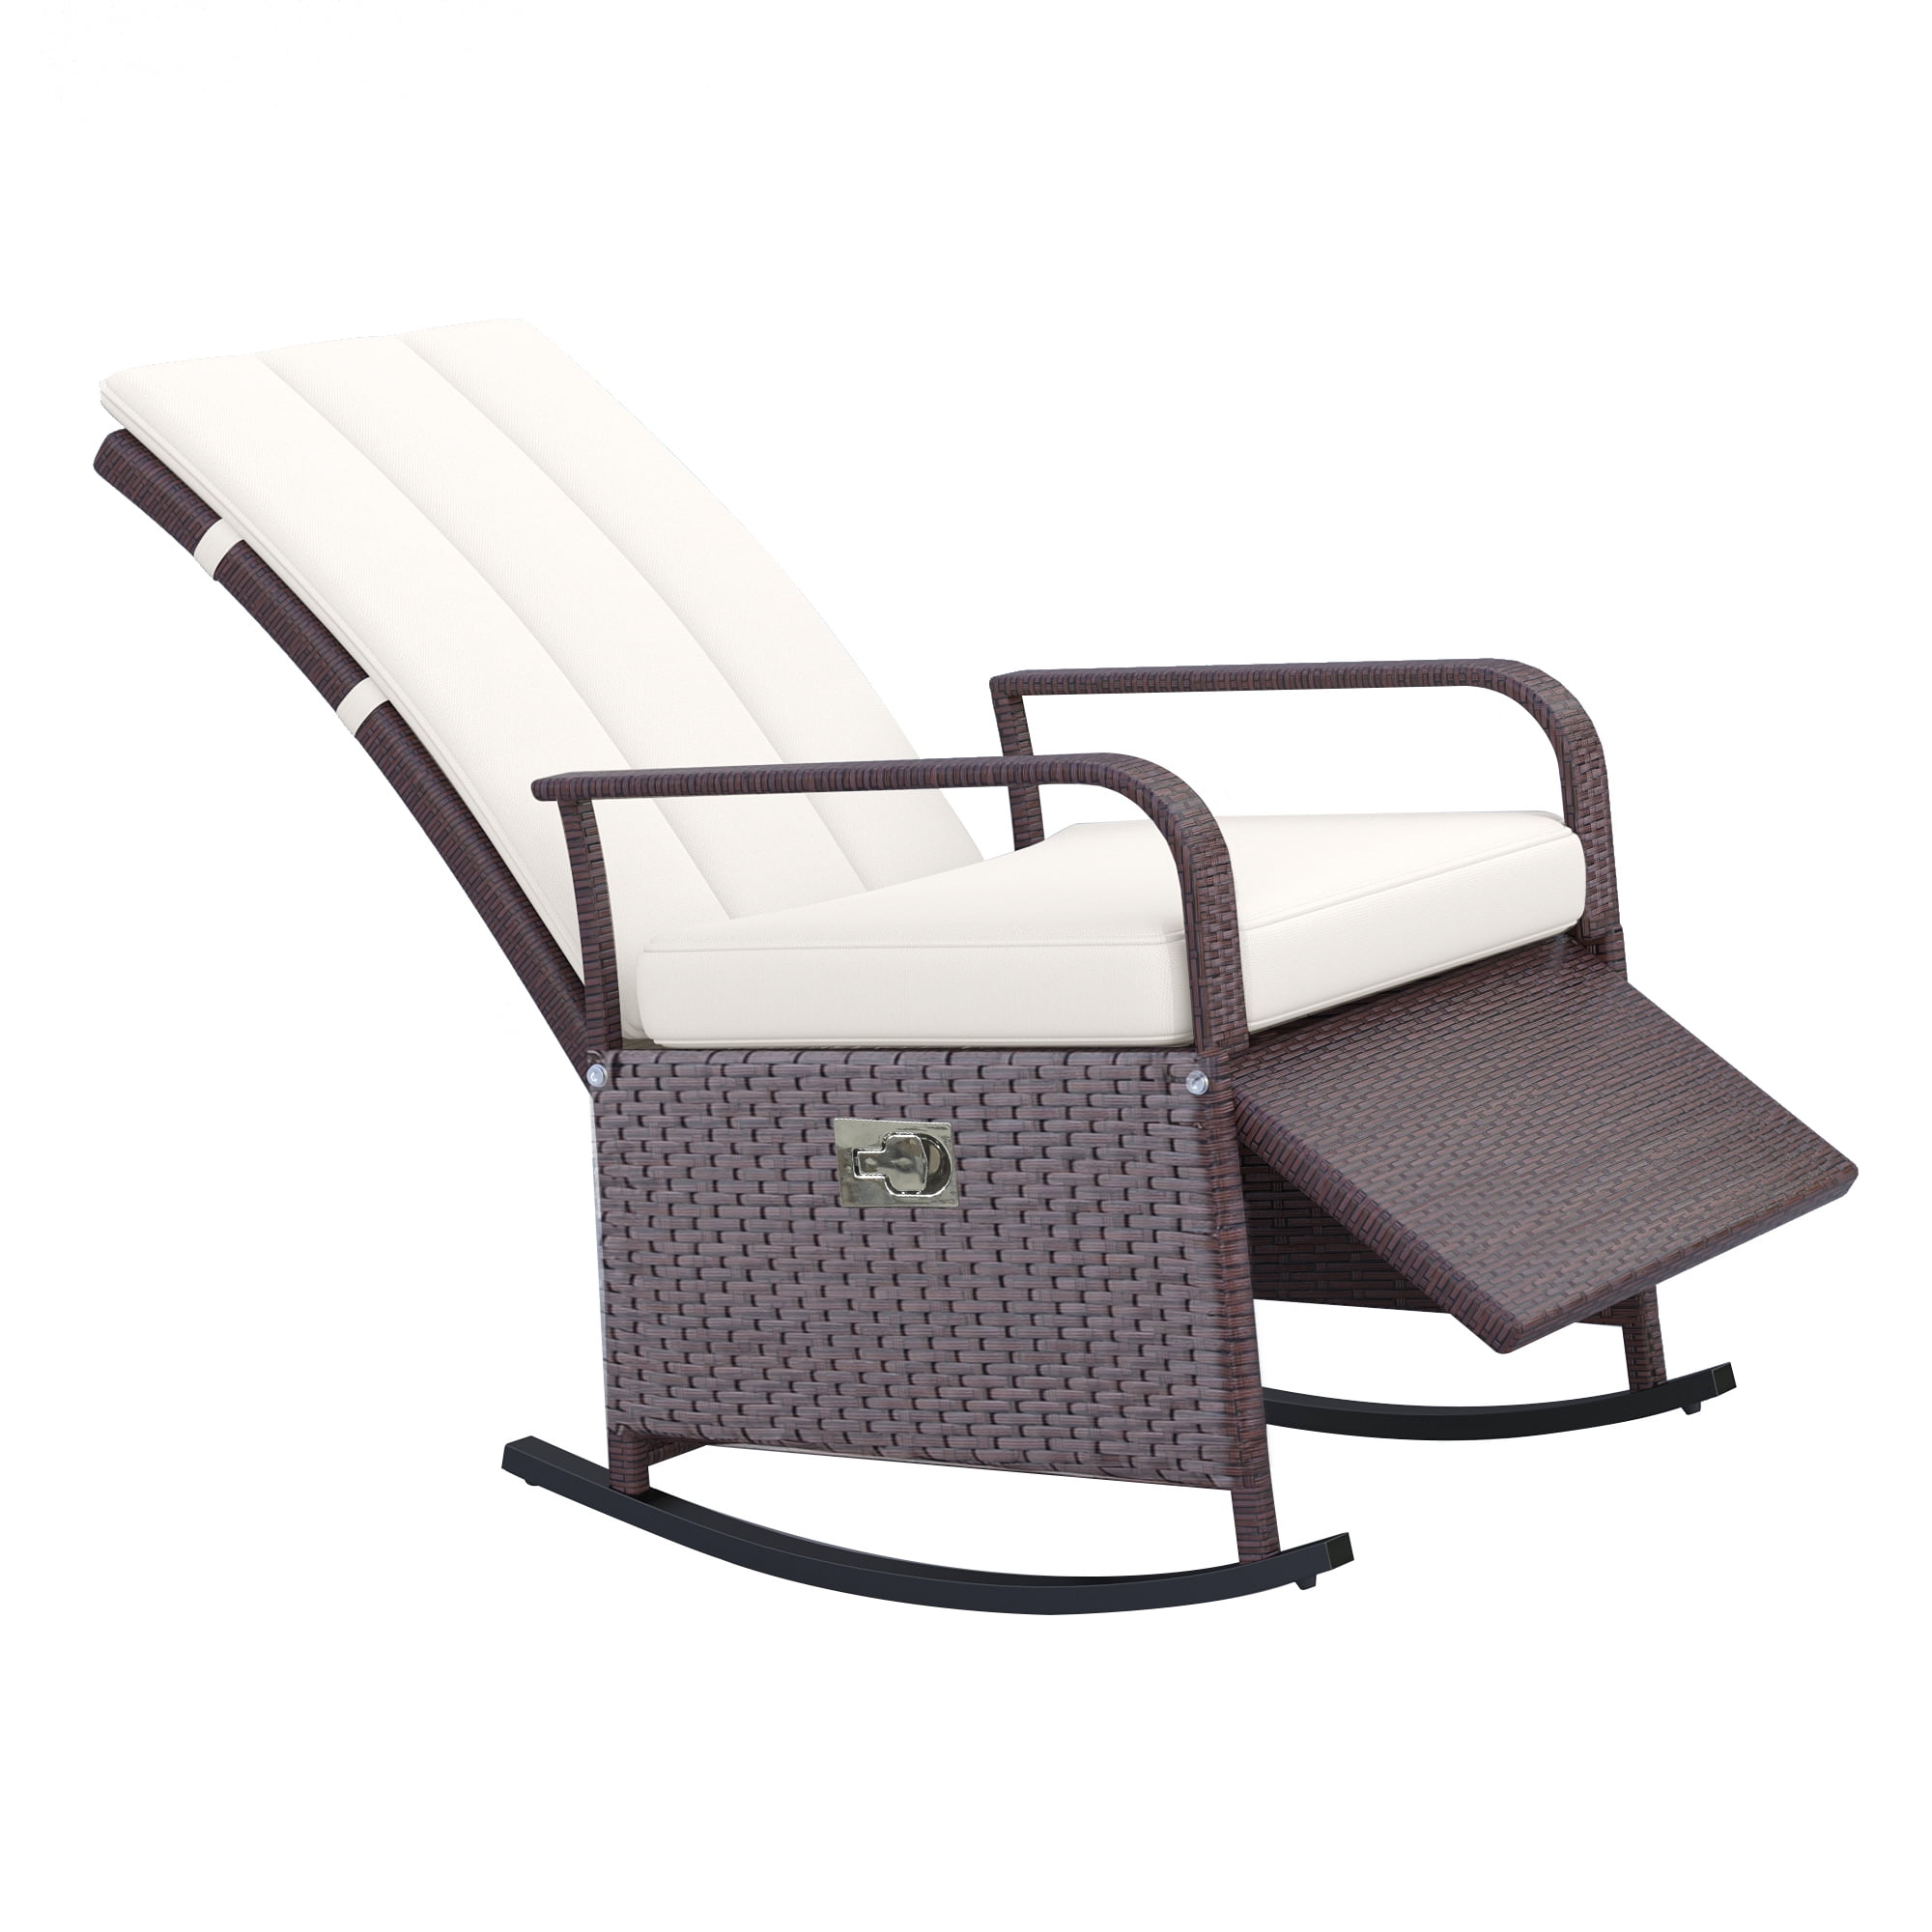 Straame Outdoor Wheeling Adjustable Rattan Sunlounger Comfortable Multi Position Sun Lounger Rattan Garden Furniture Reclining Outdoor Sunbed with Wheels and Cushion Double Brown